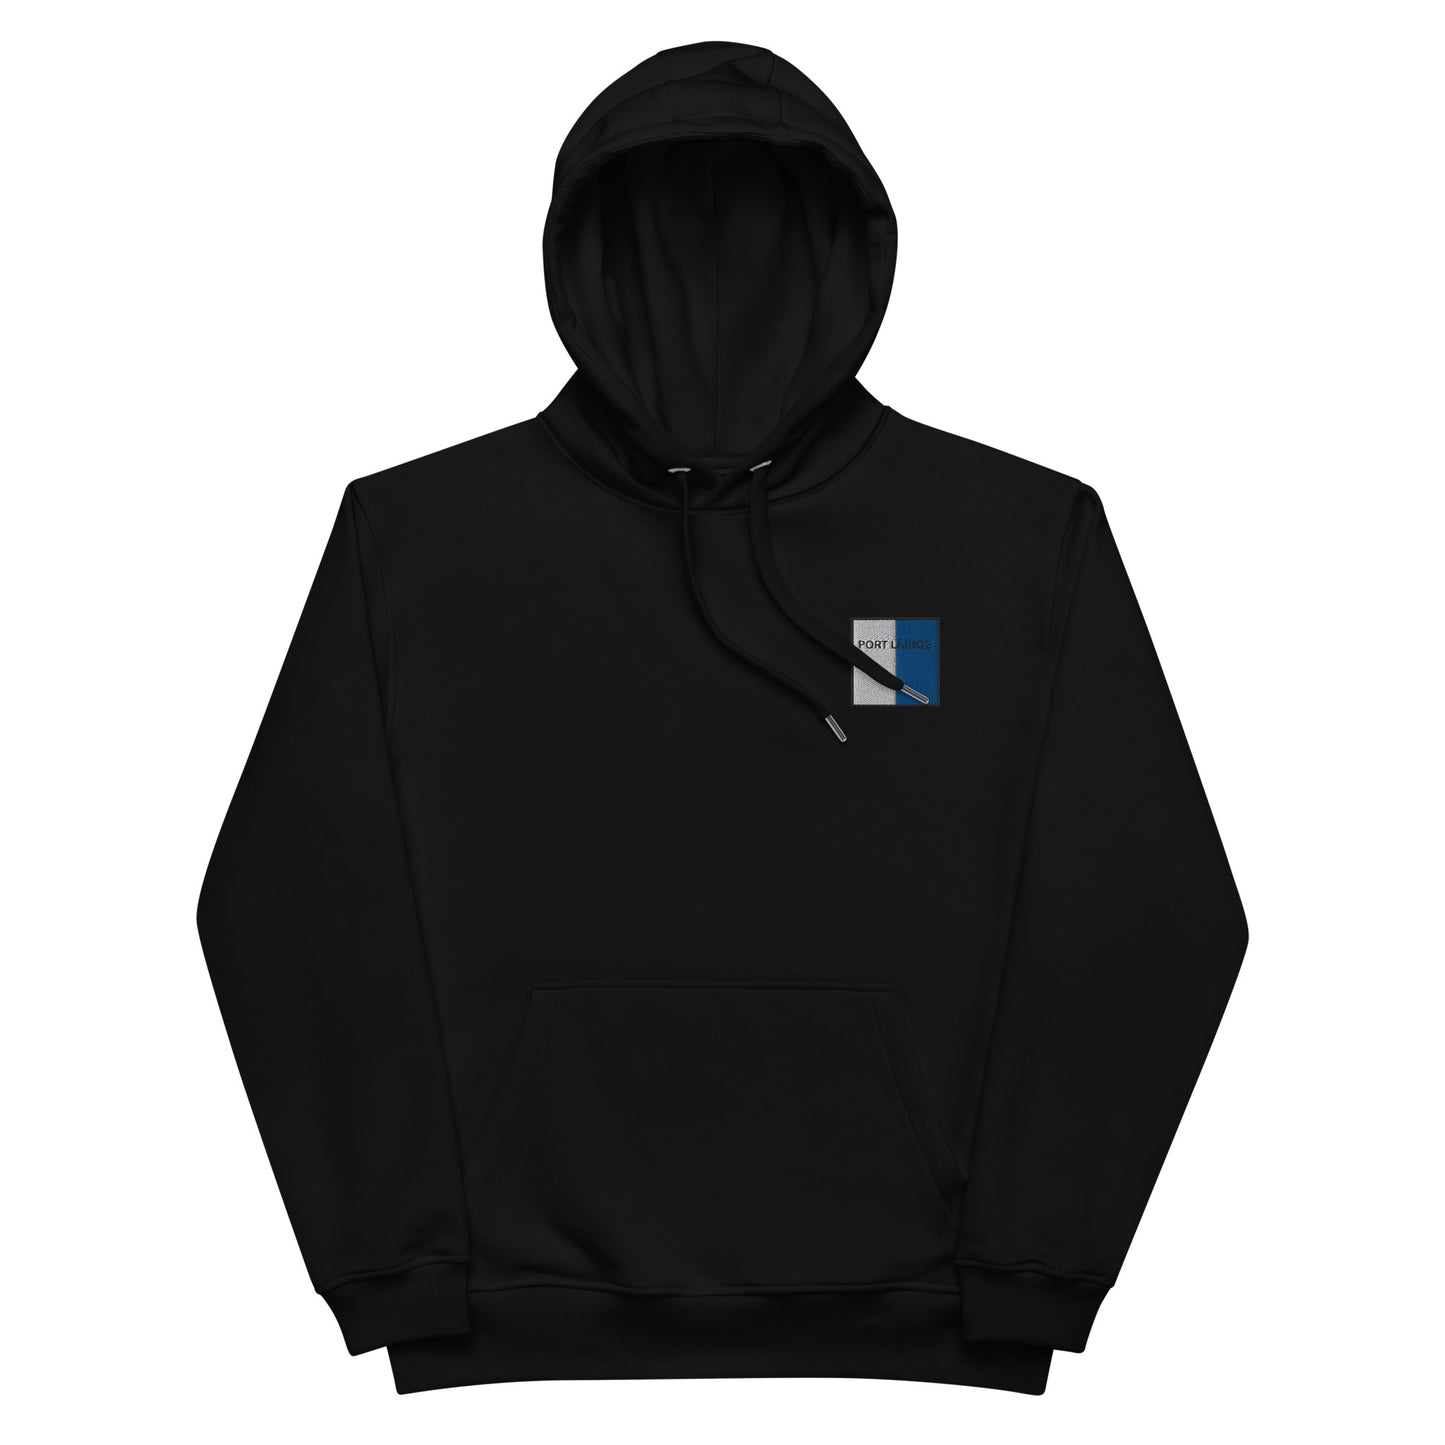 Embroidered Port Láirge Unisex Eco Hoodie